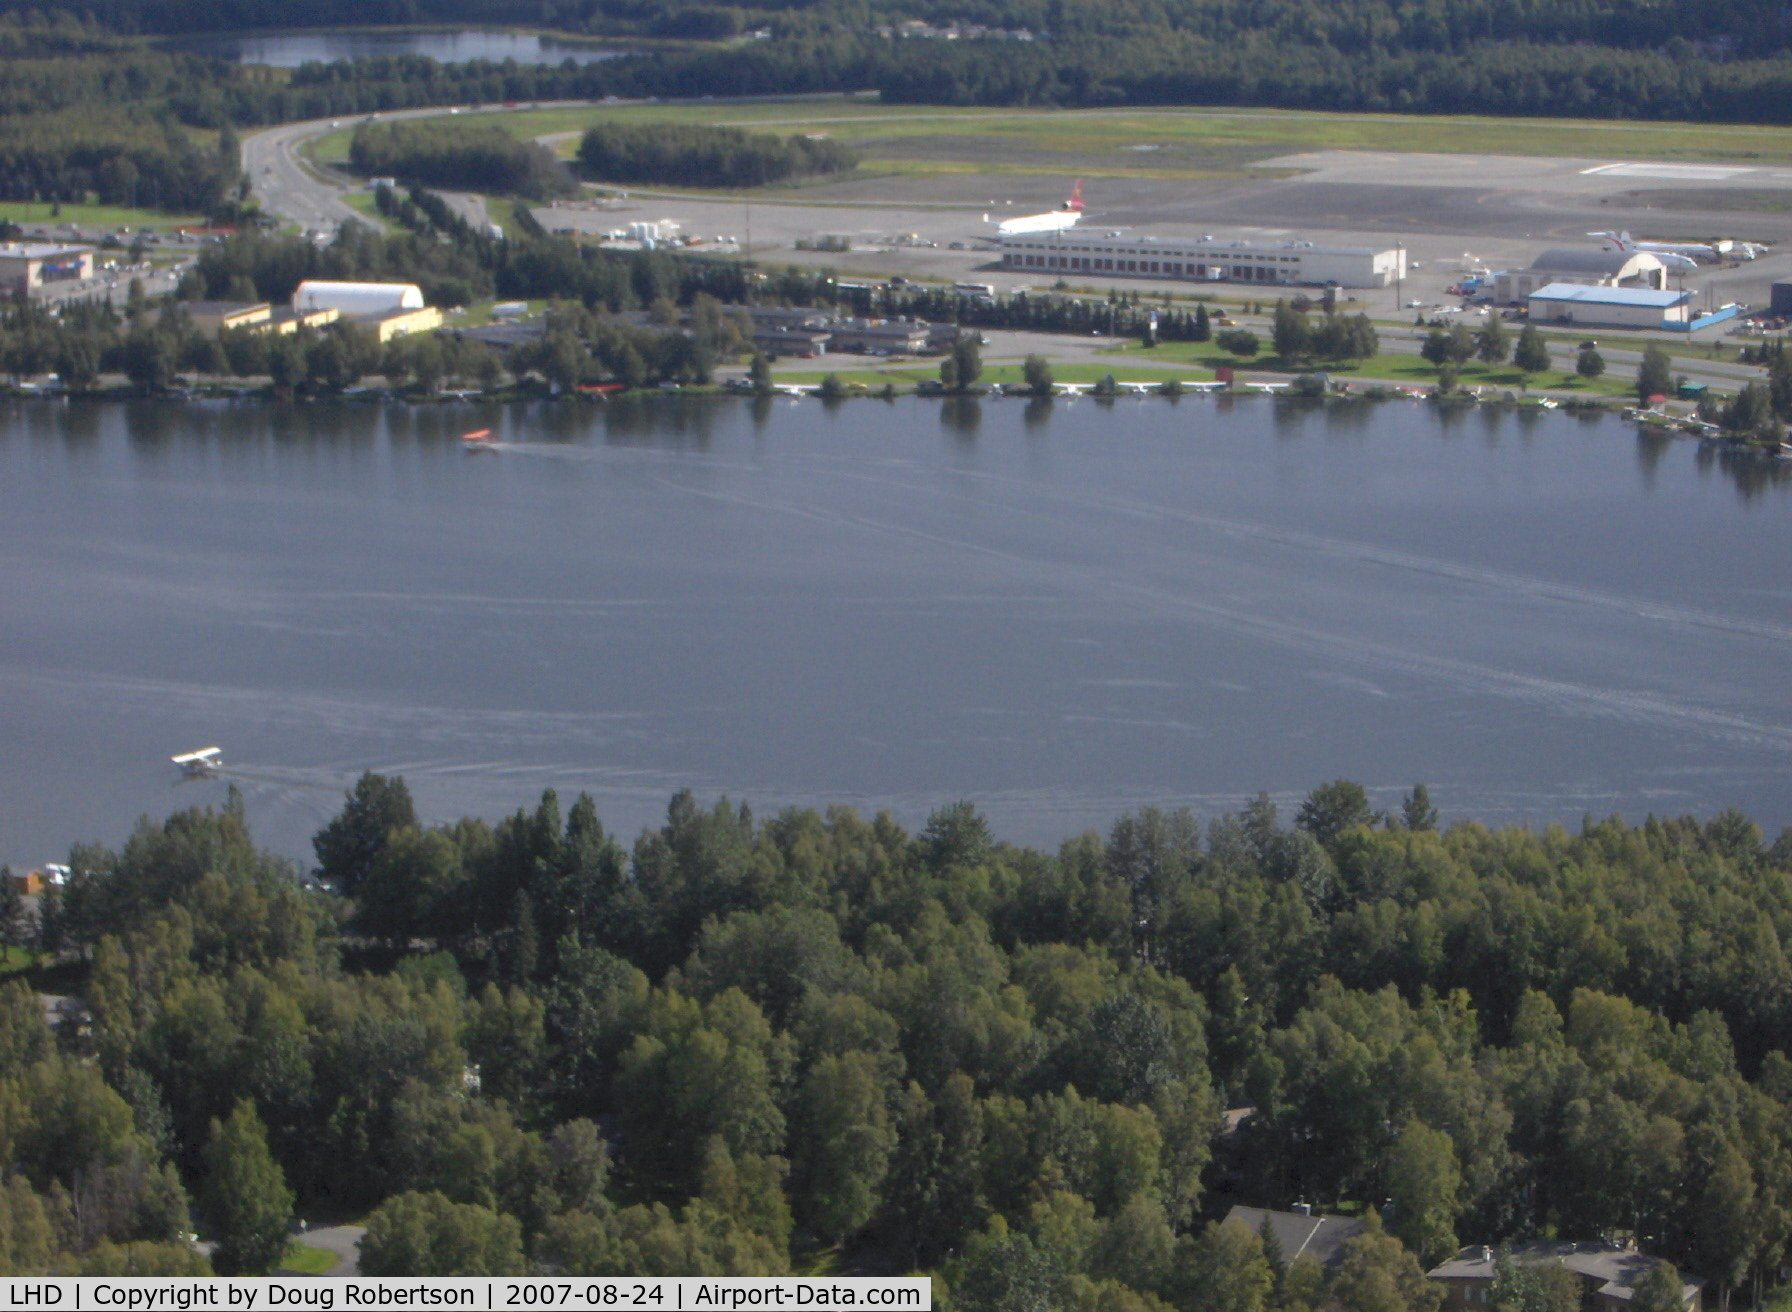 Lake Hood Seaplane Base (LHD) - Lake Hood SPB, Anchorage Int'l Airport ANC in background-taken from DHC-2 Beaver float plane N4444Z enroute to LHD